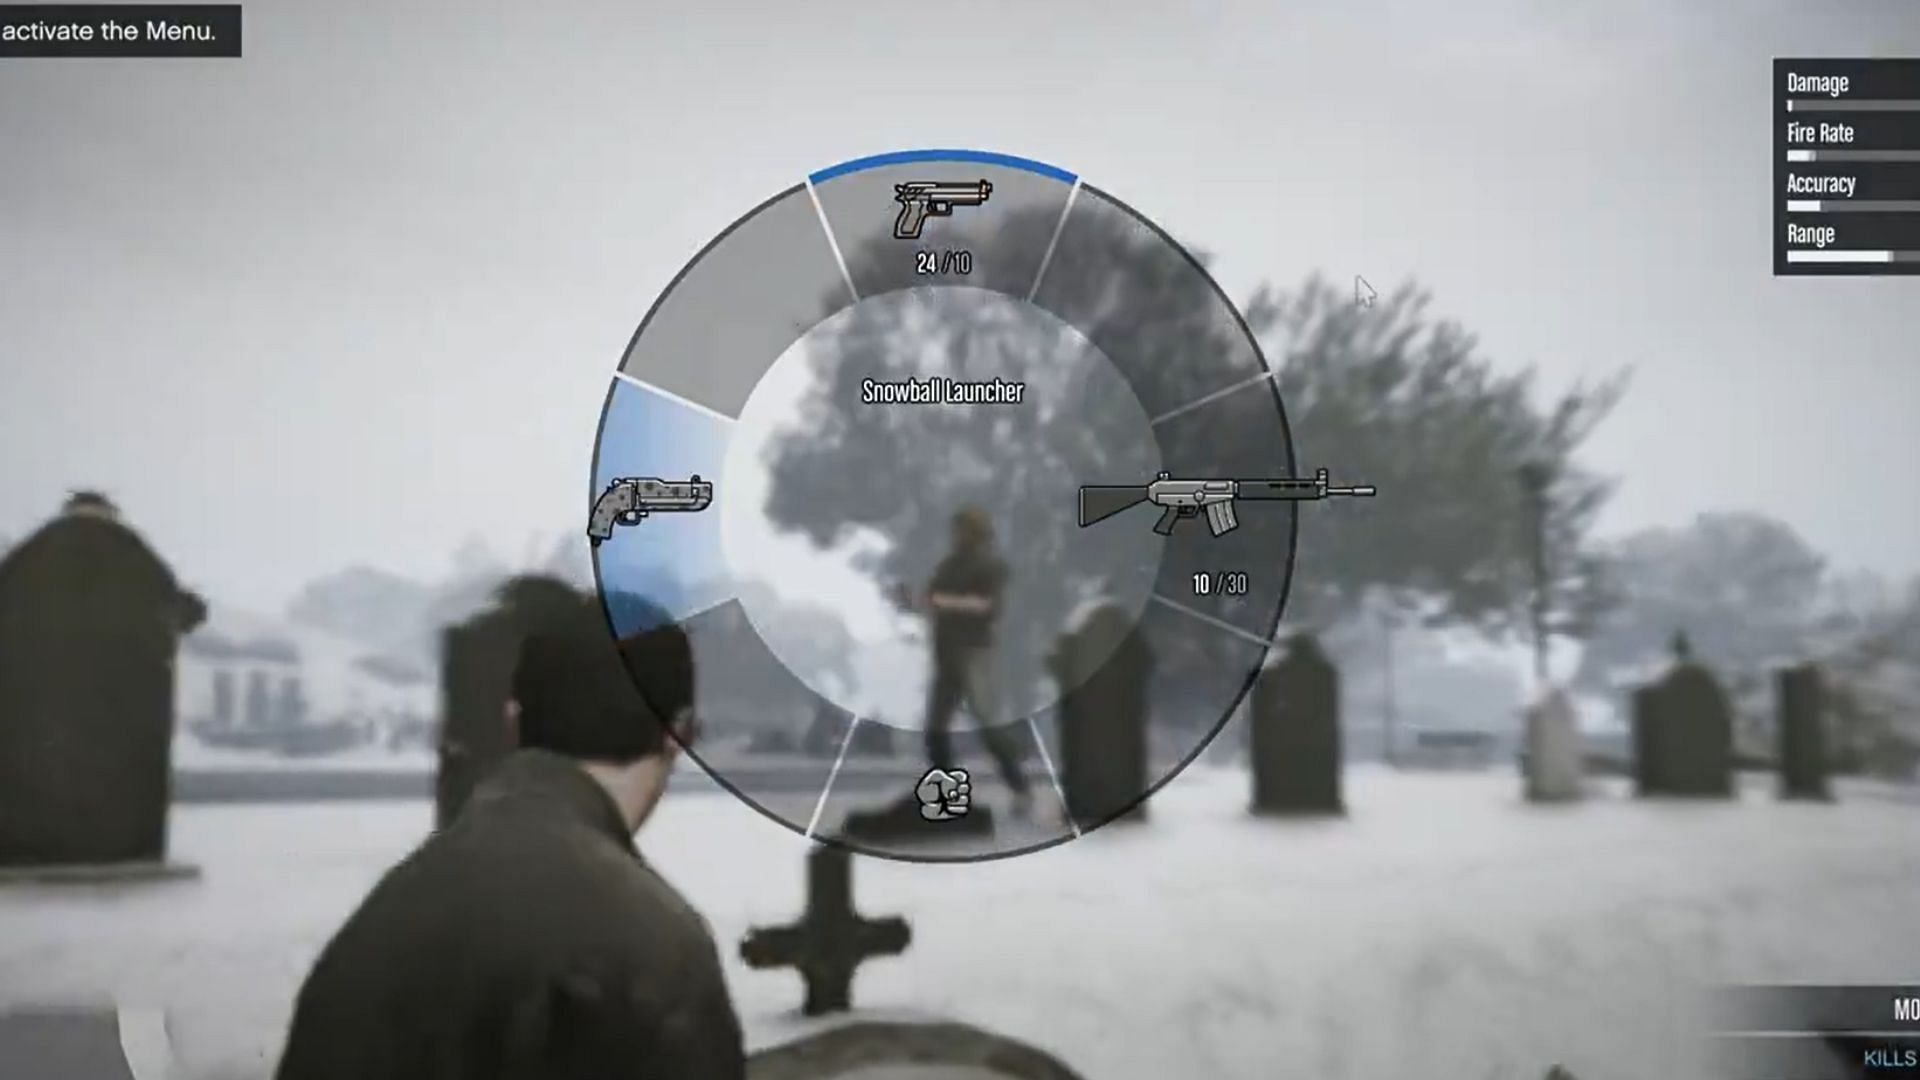 The Snowball Launcher in the weapon wheel. (Image via X/@Floorball__)